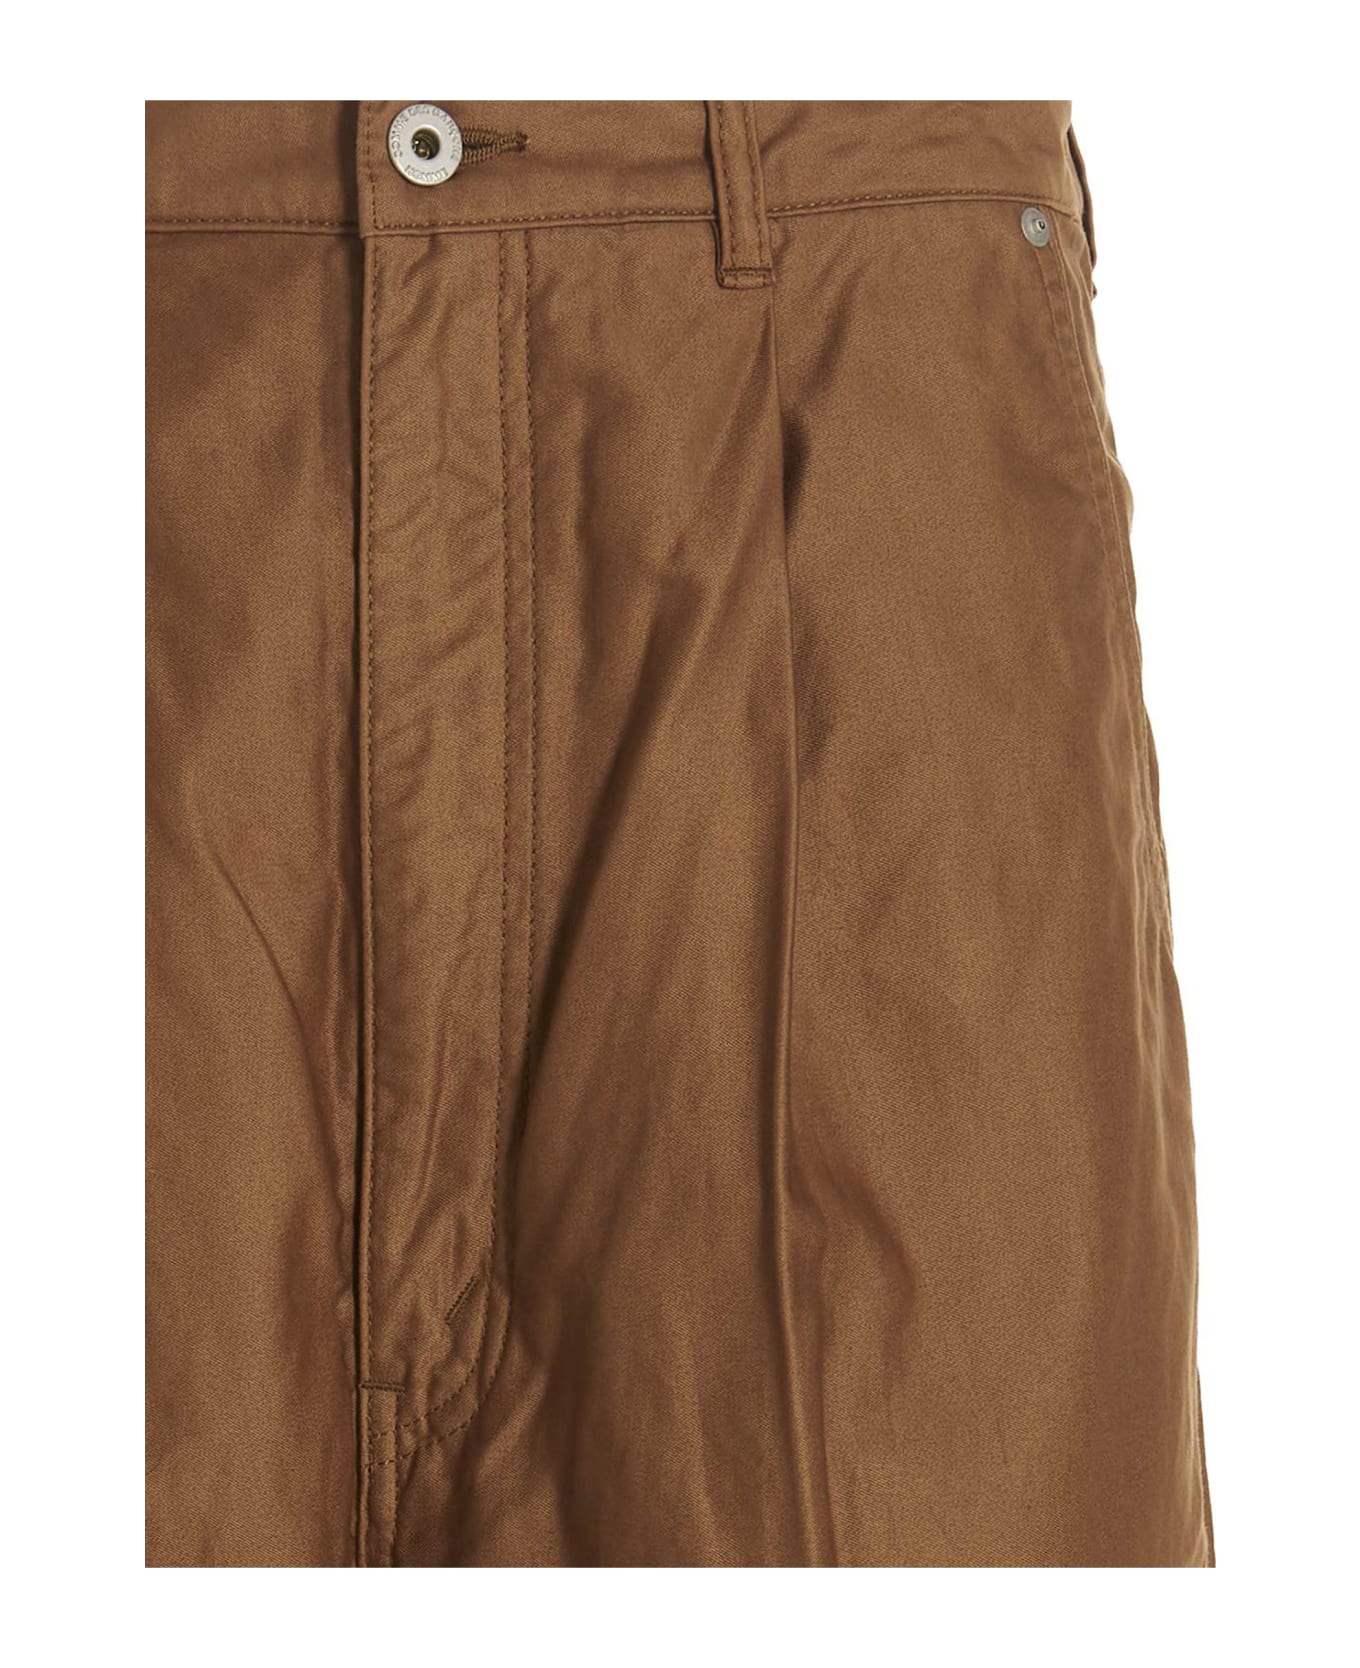 Comme des Garçons Homme Relaxed Chinos - Beige ボトムス